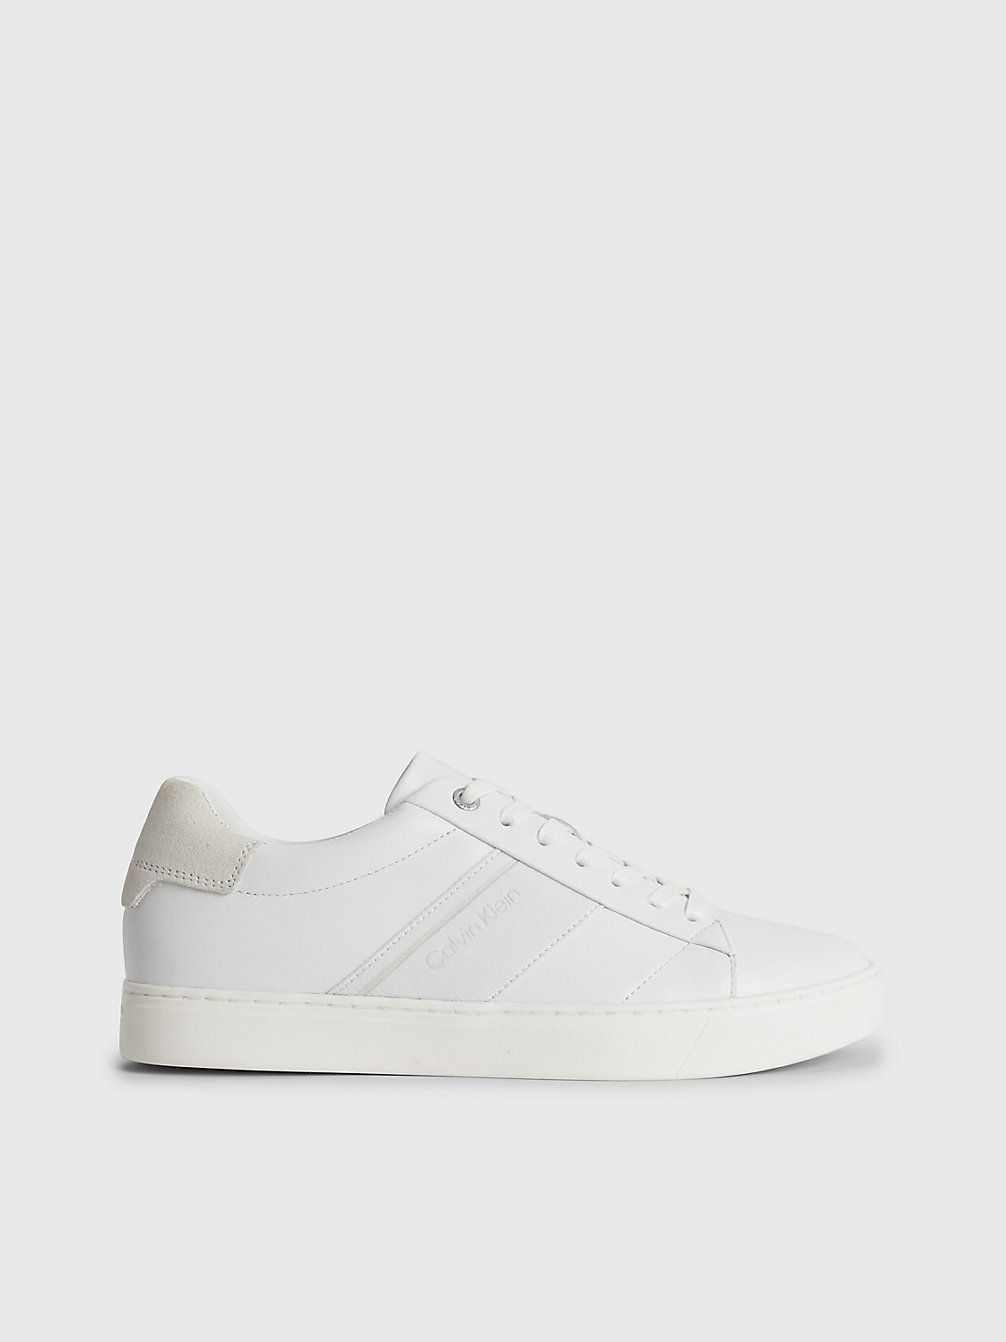 BRIGHT WHITE Leather Trainers undefined women Calvin Klein